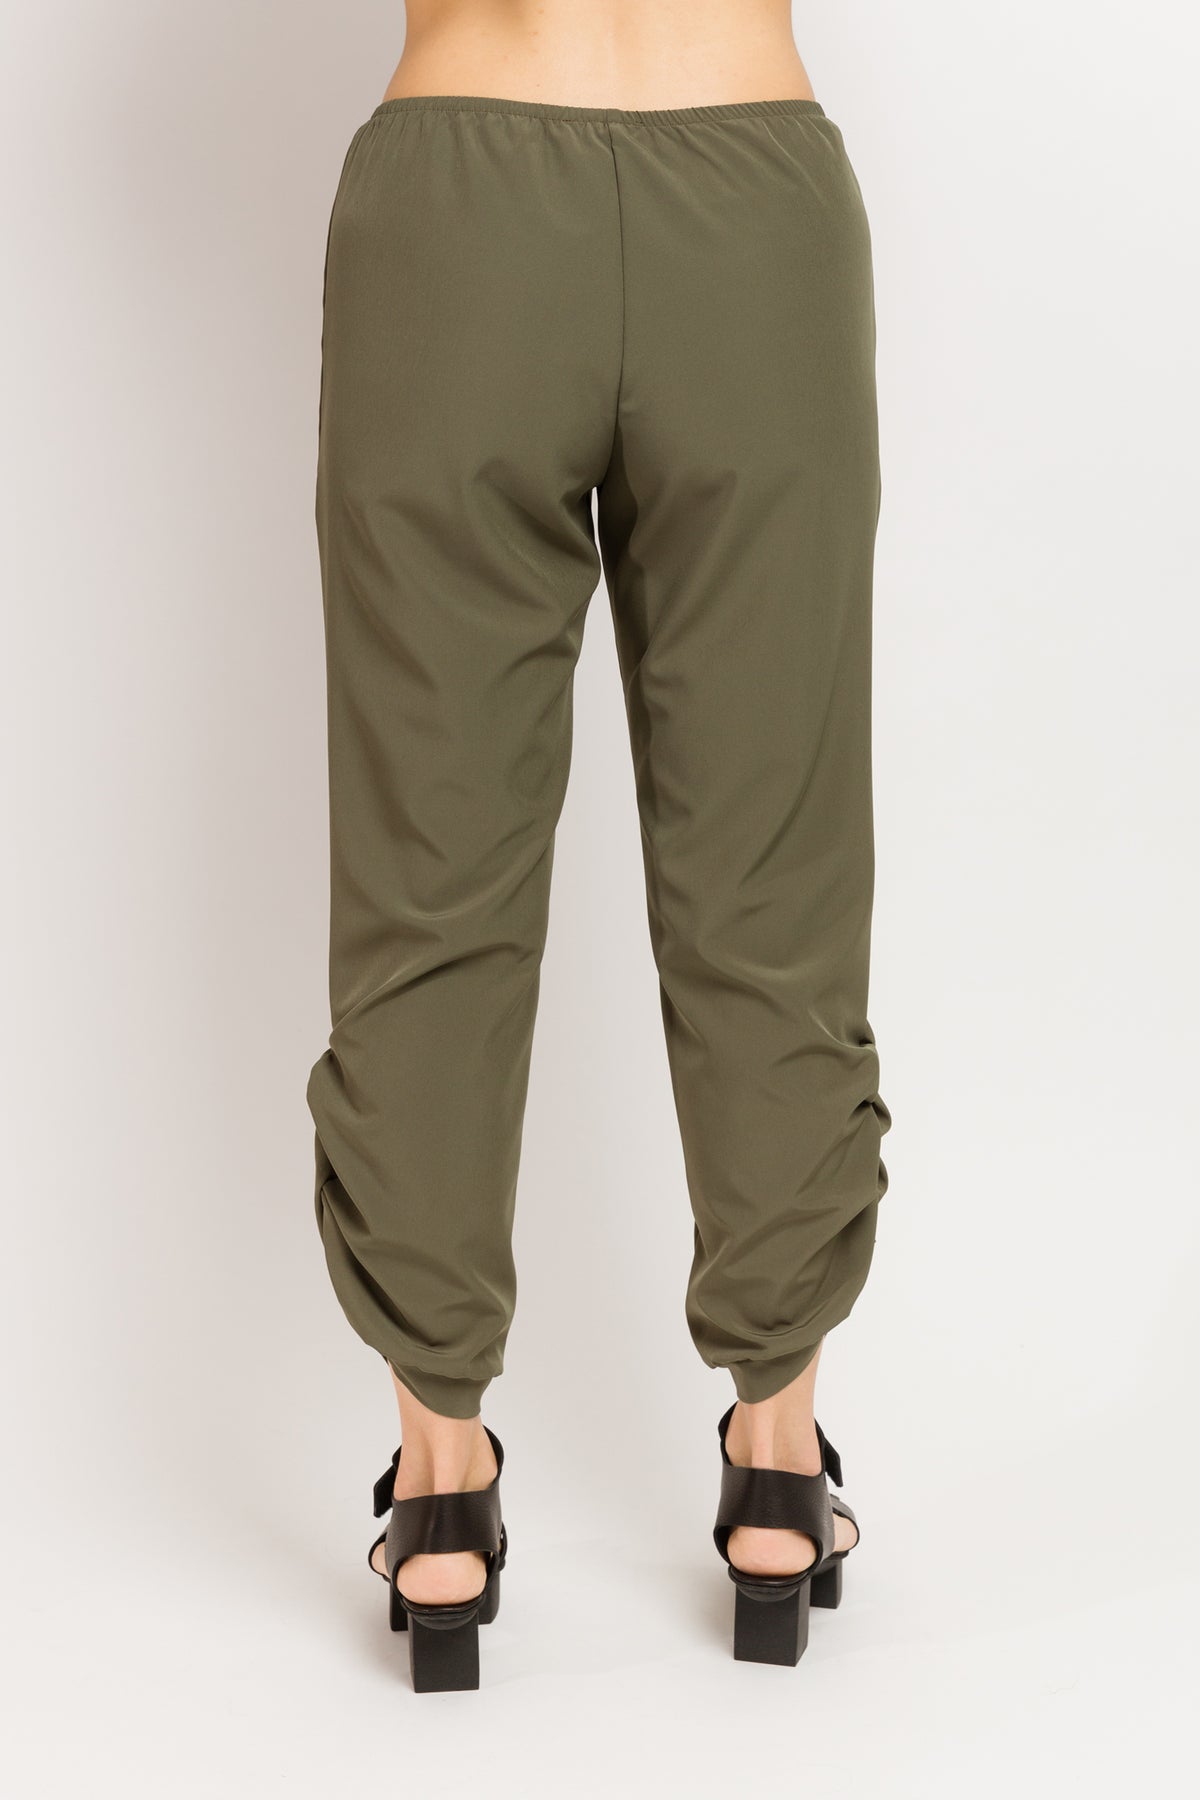 Caterpillar Pants in Olive Techno Stretch